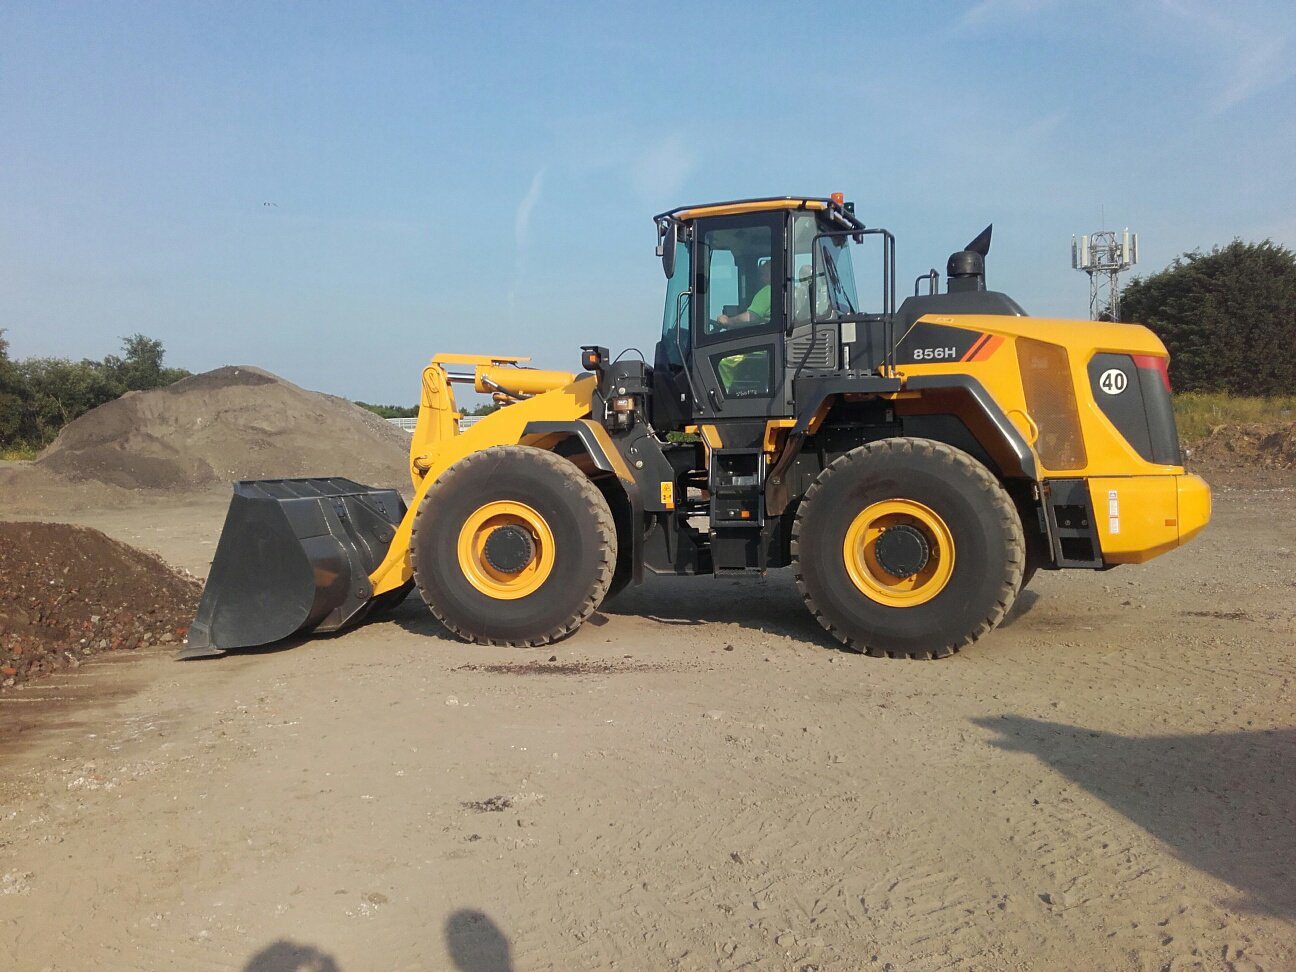 New Wheel Loader Top Brand Clg856h with Imported Engine